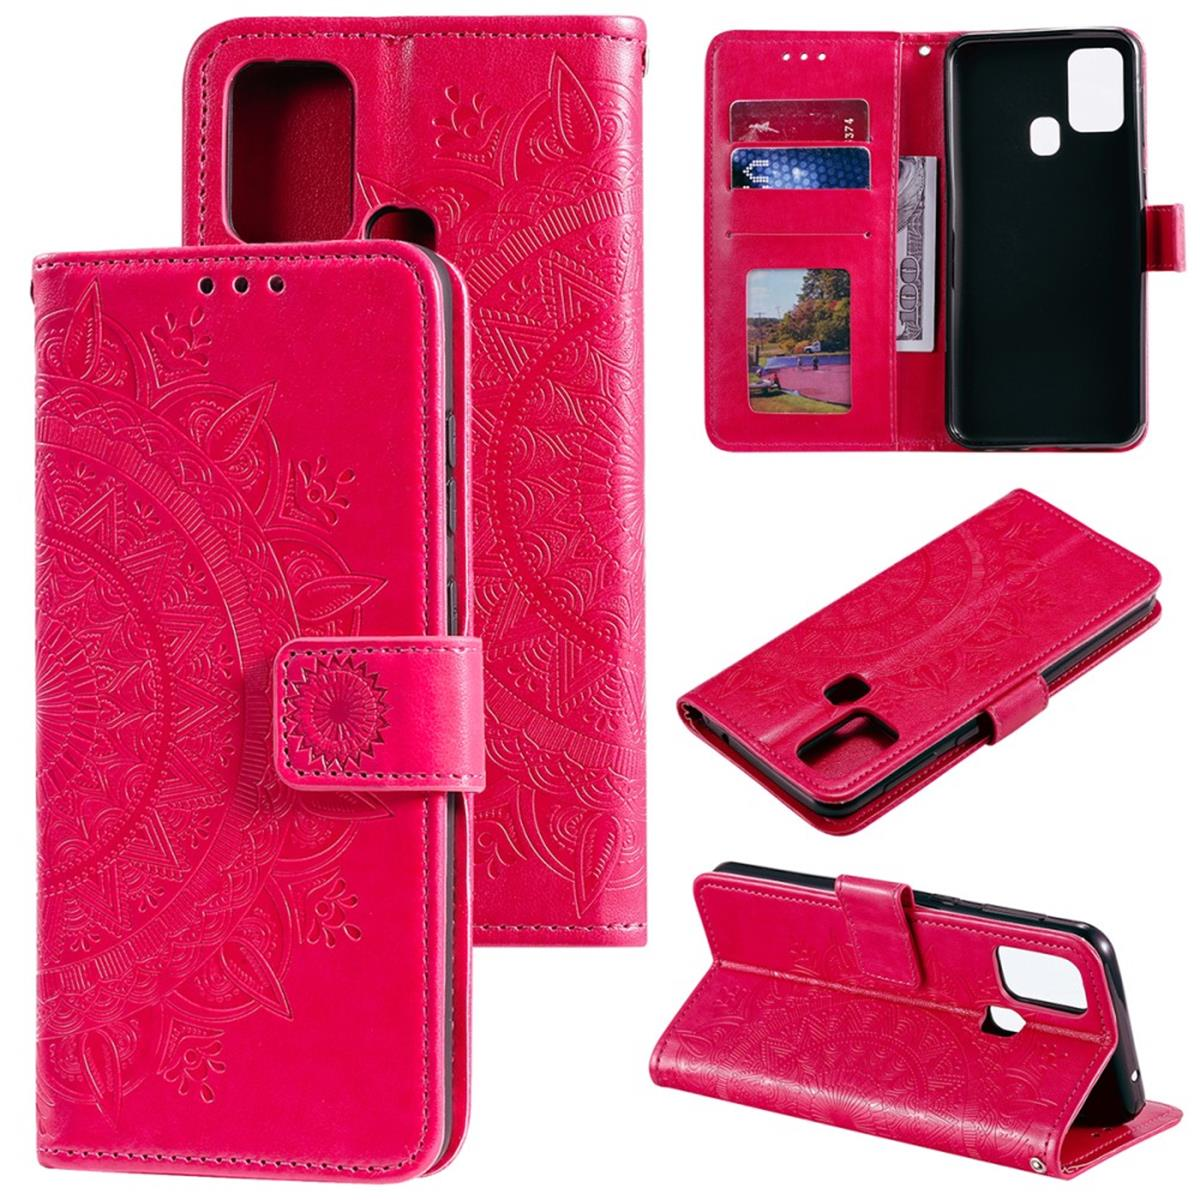 COVERKINGZ Klapphülle mit Mandala Muster, Galaxy M21/M30s, Samsung, Bookcover, Pink